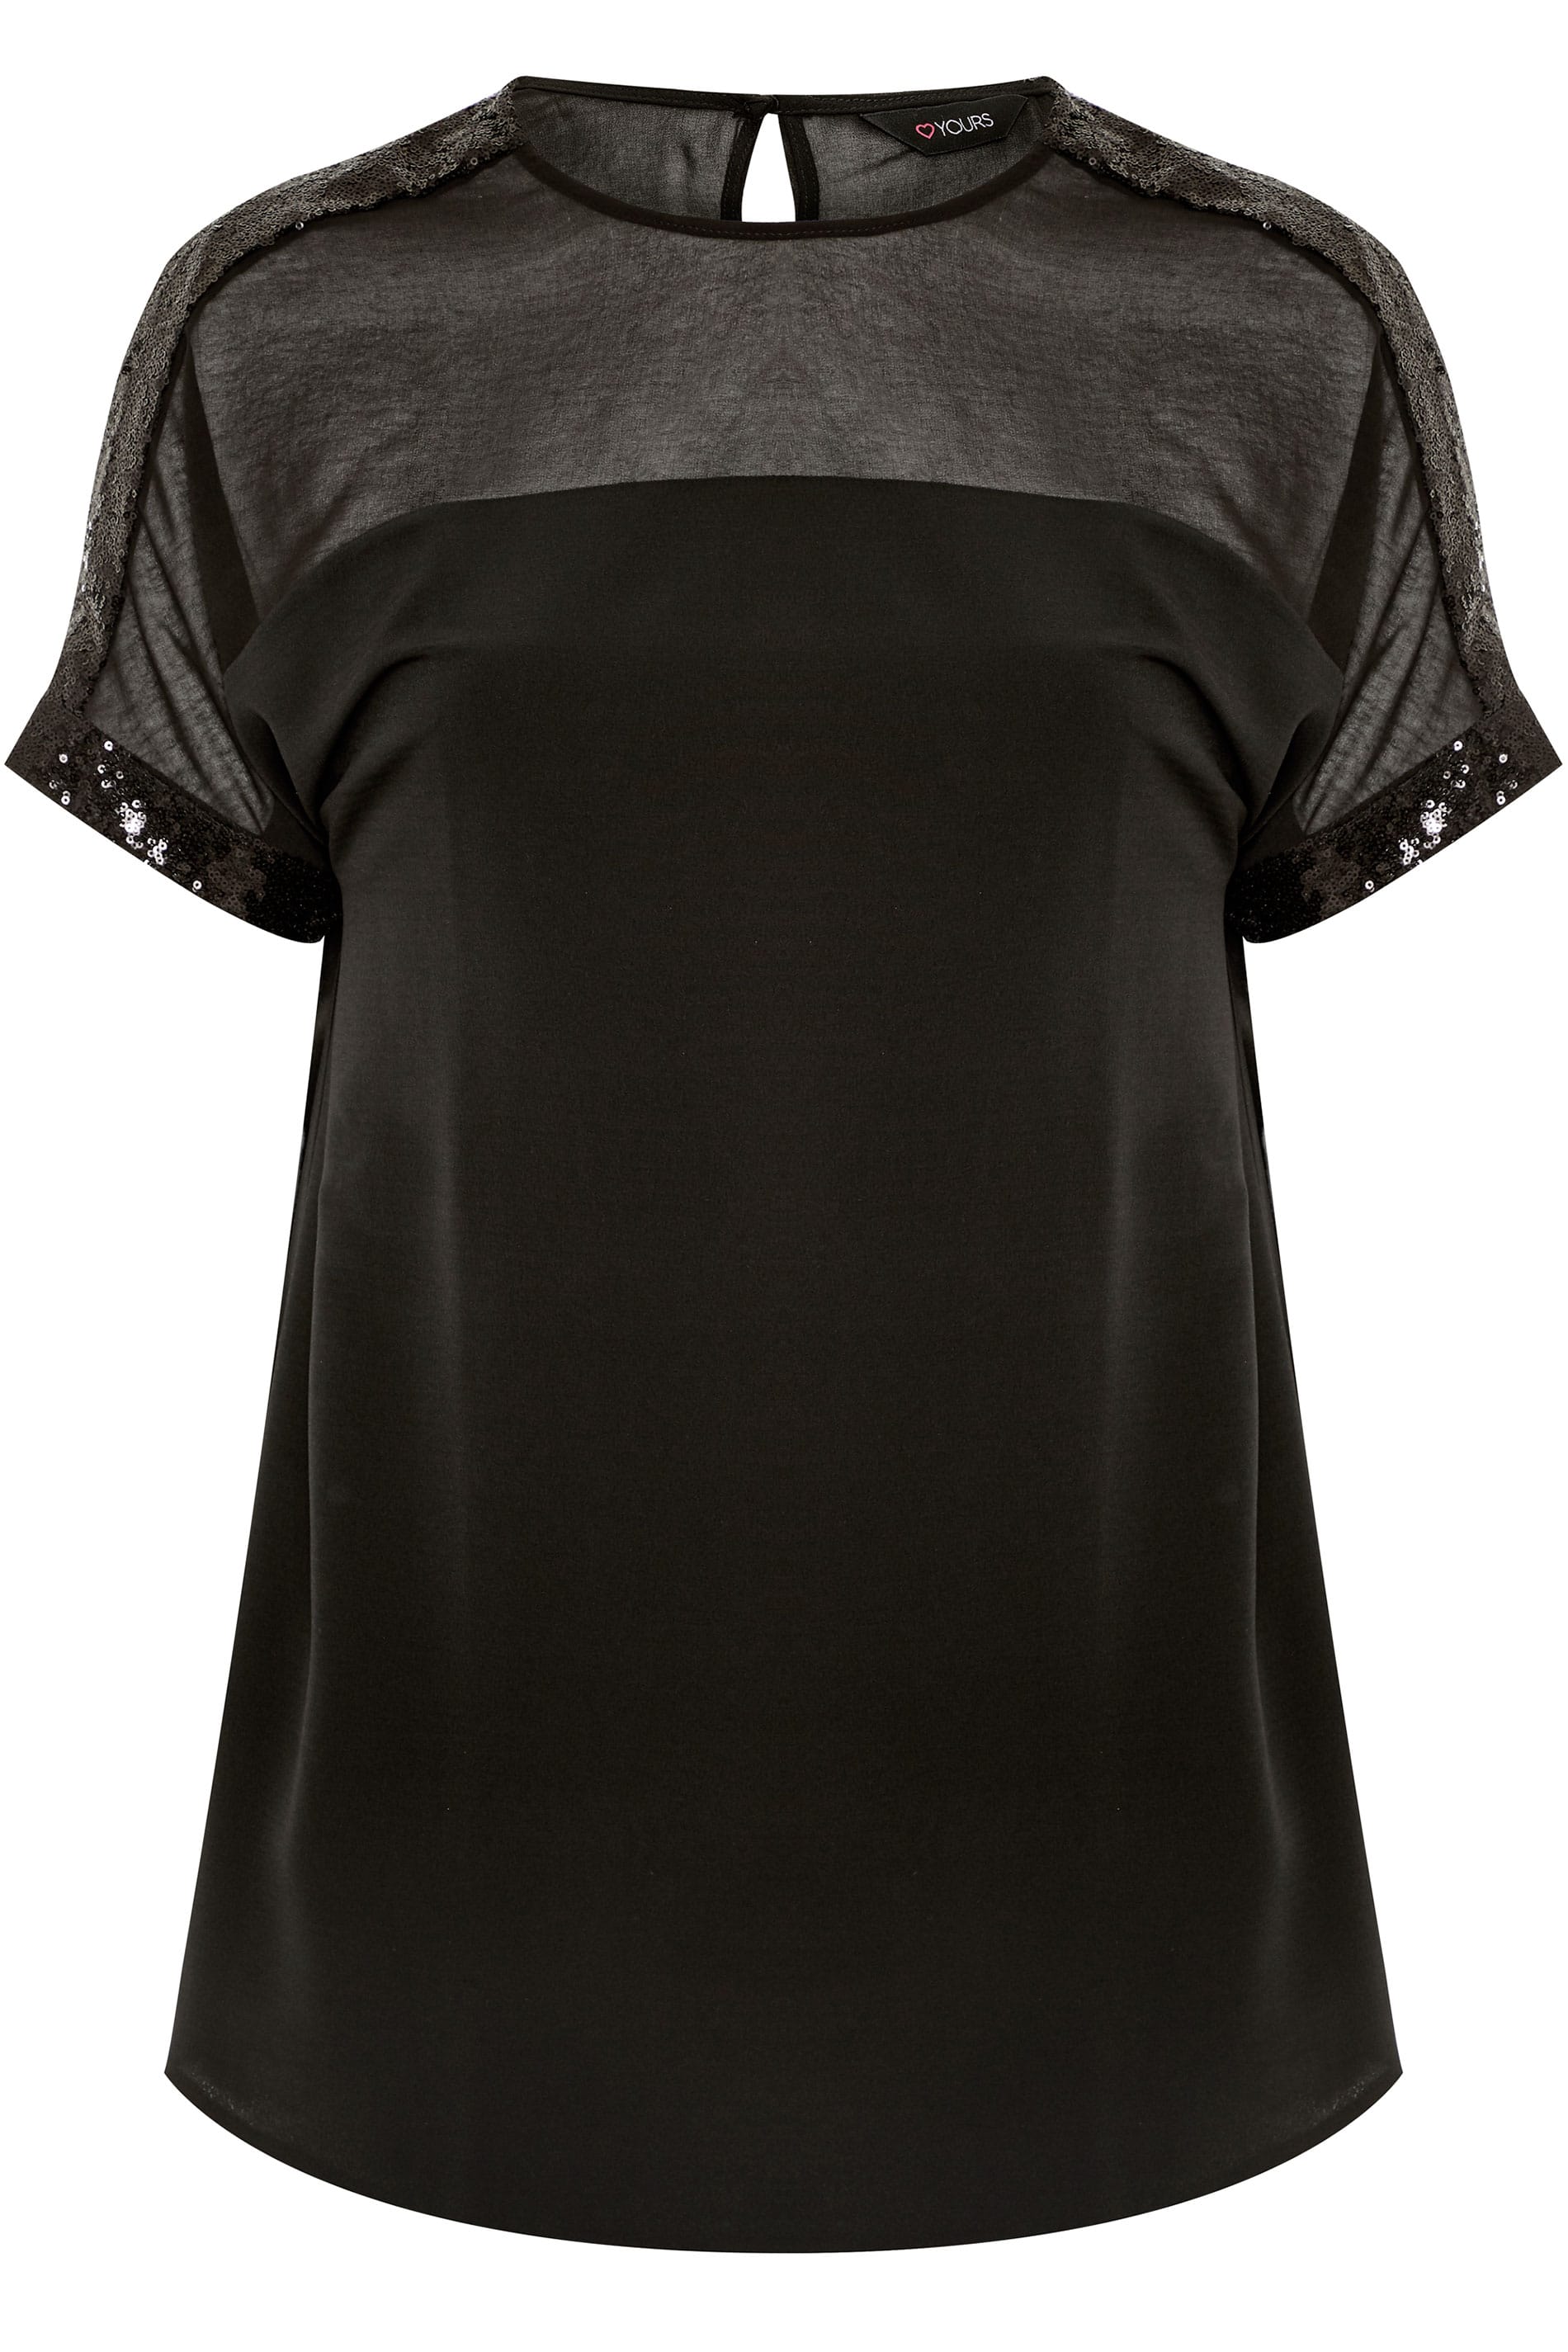 Black Sheer Panel Sequin Shell Top | Yours Clothing